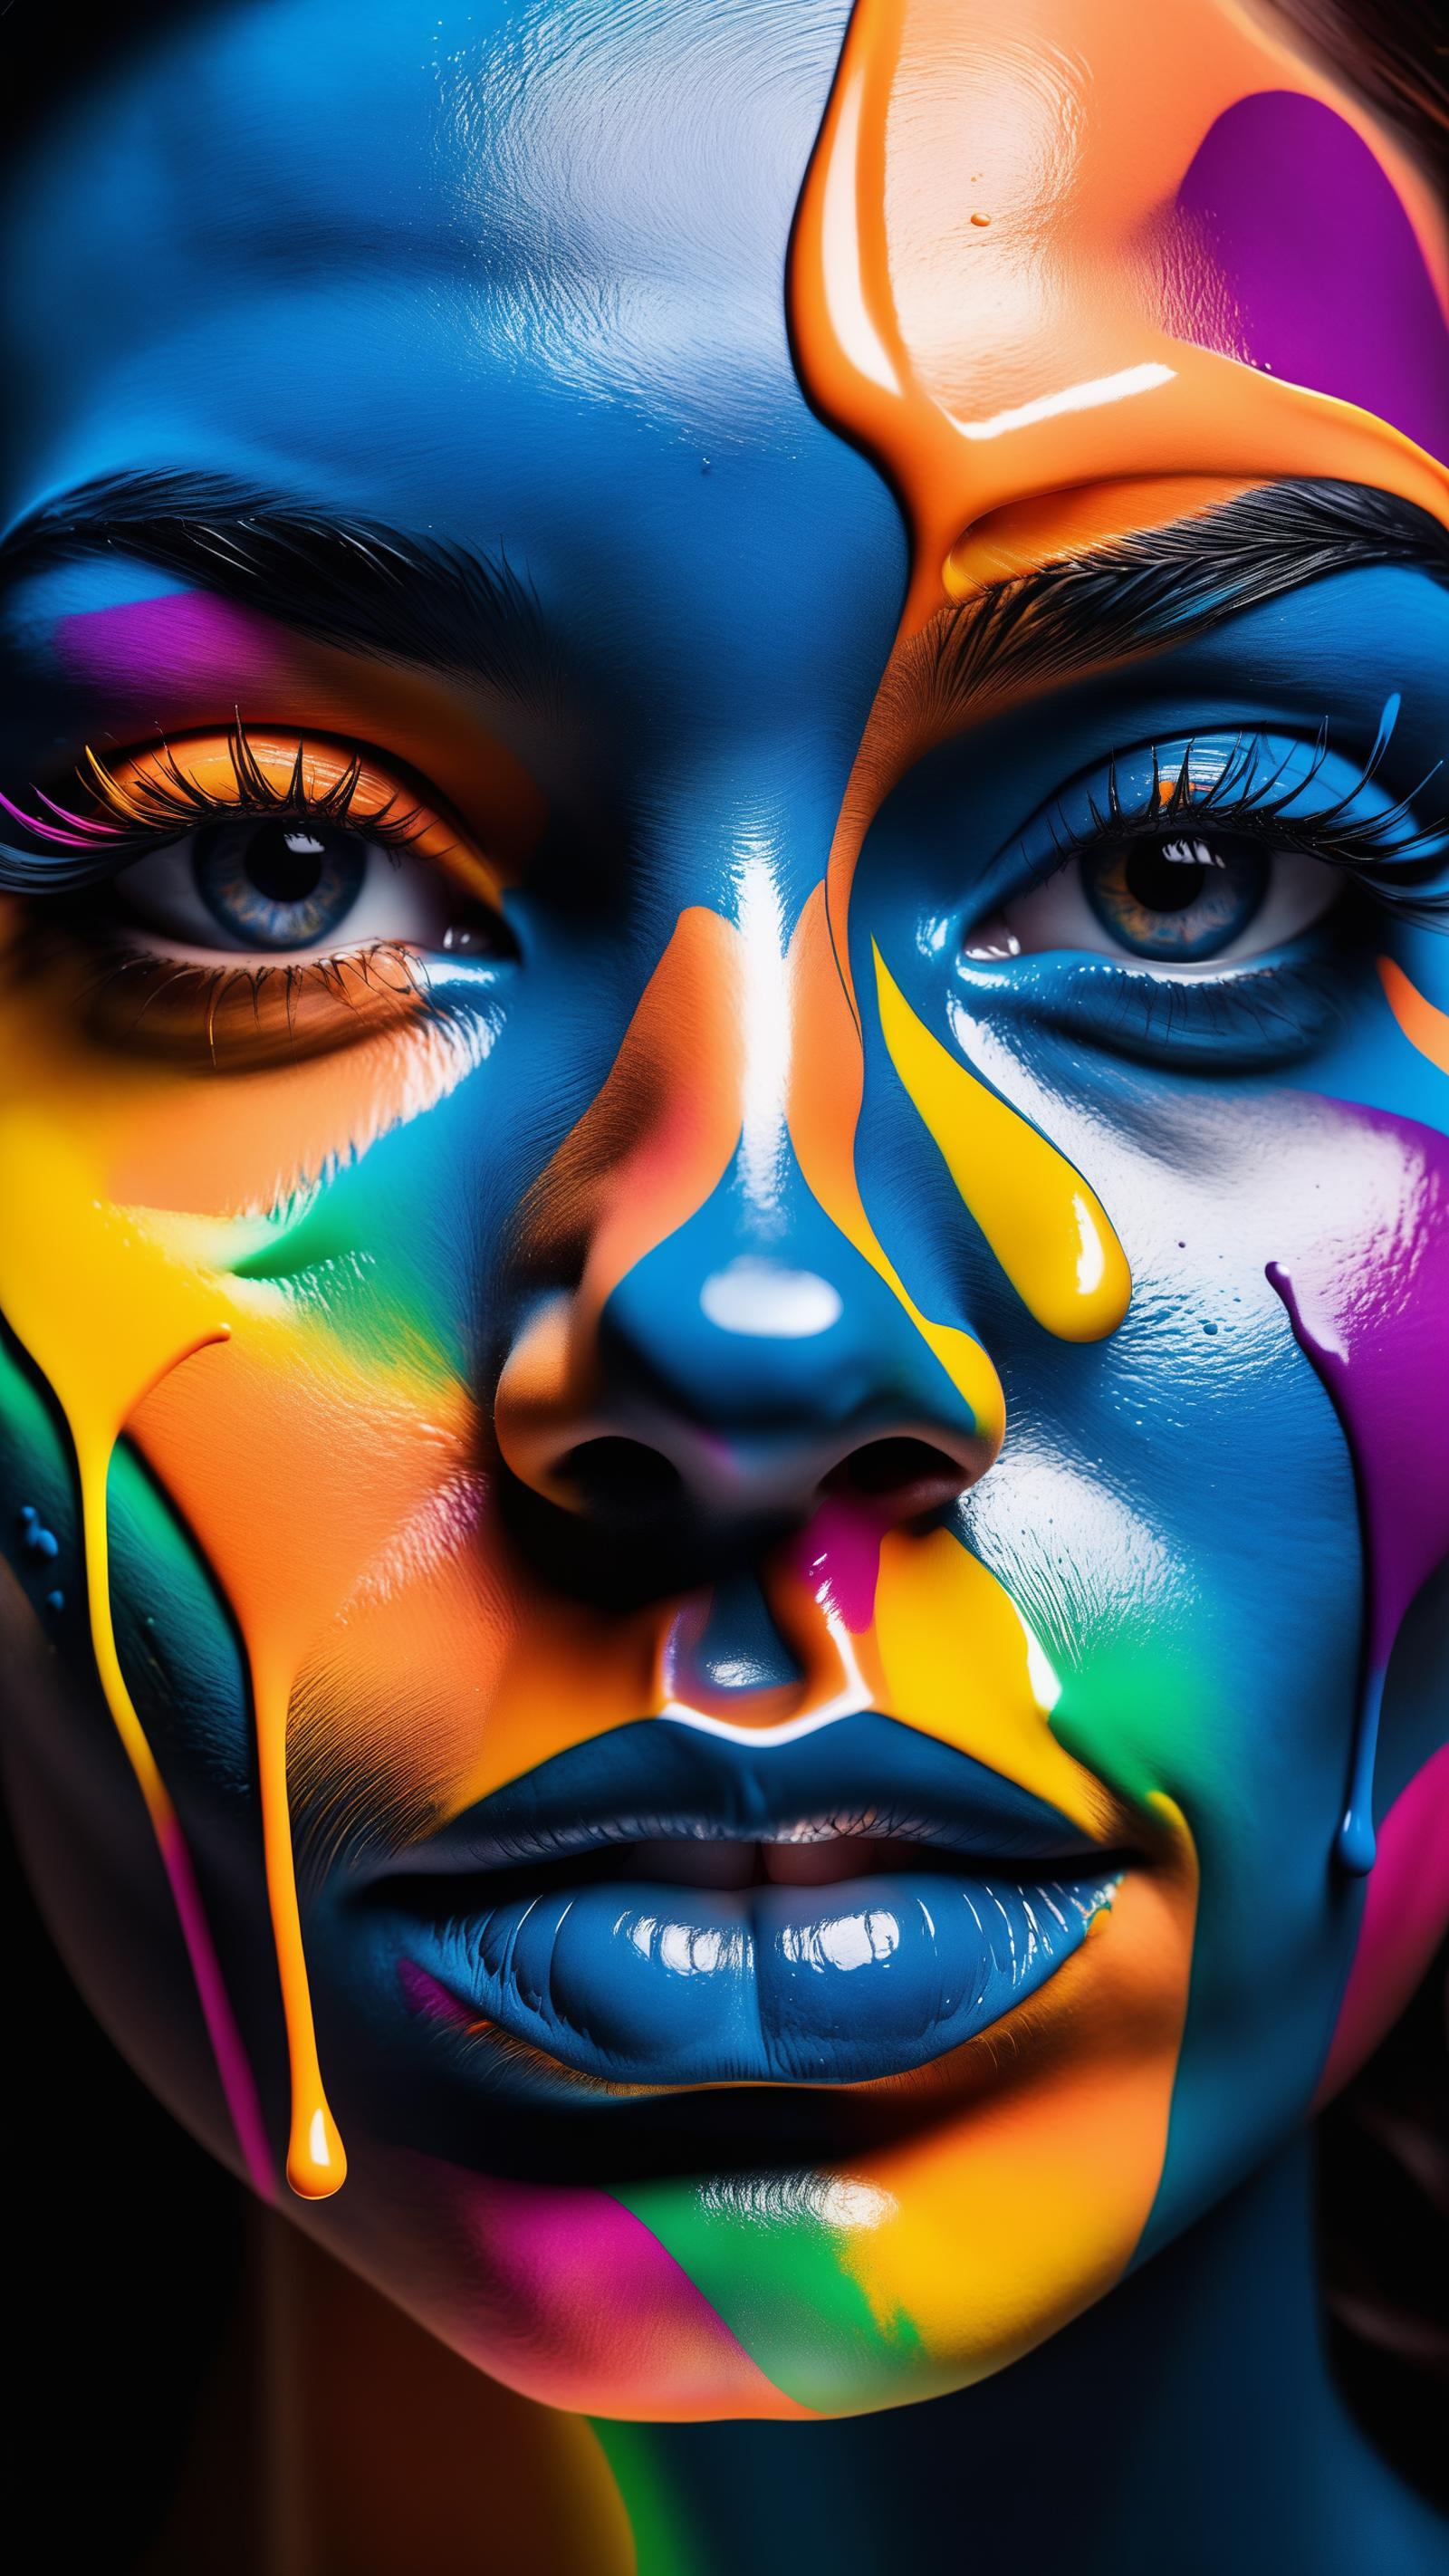 Colorful Rainbow Face of a Woman with Yellow Eyelashes and Blue Eyes